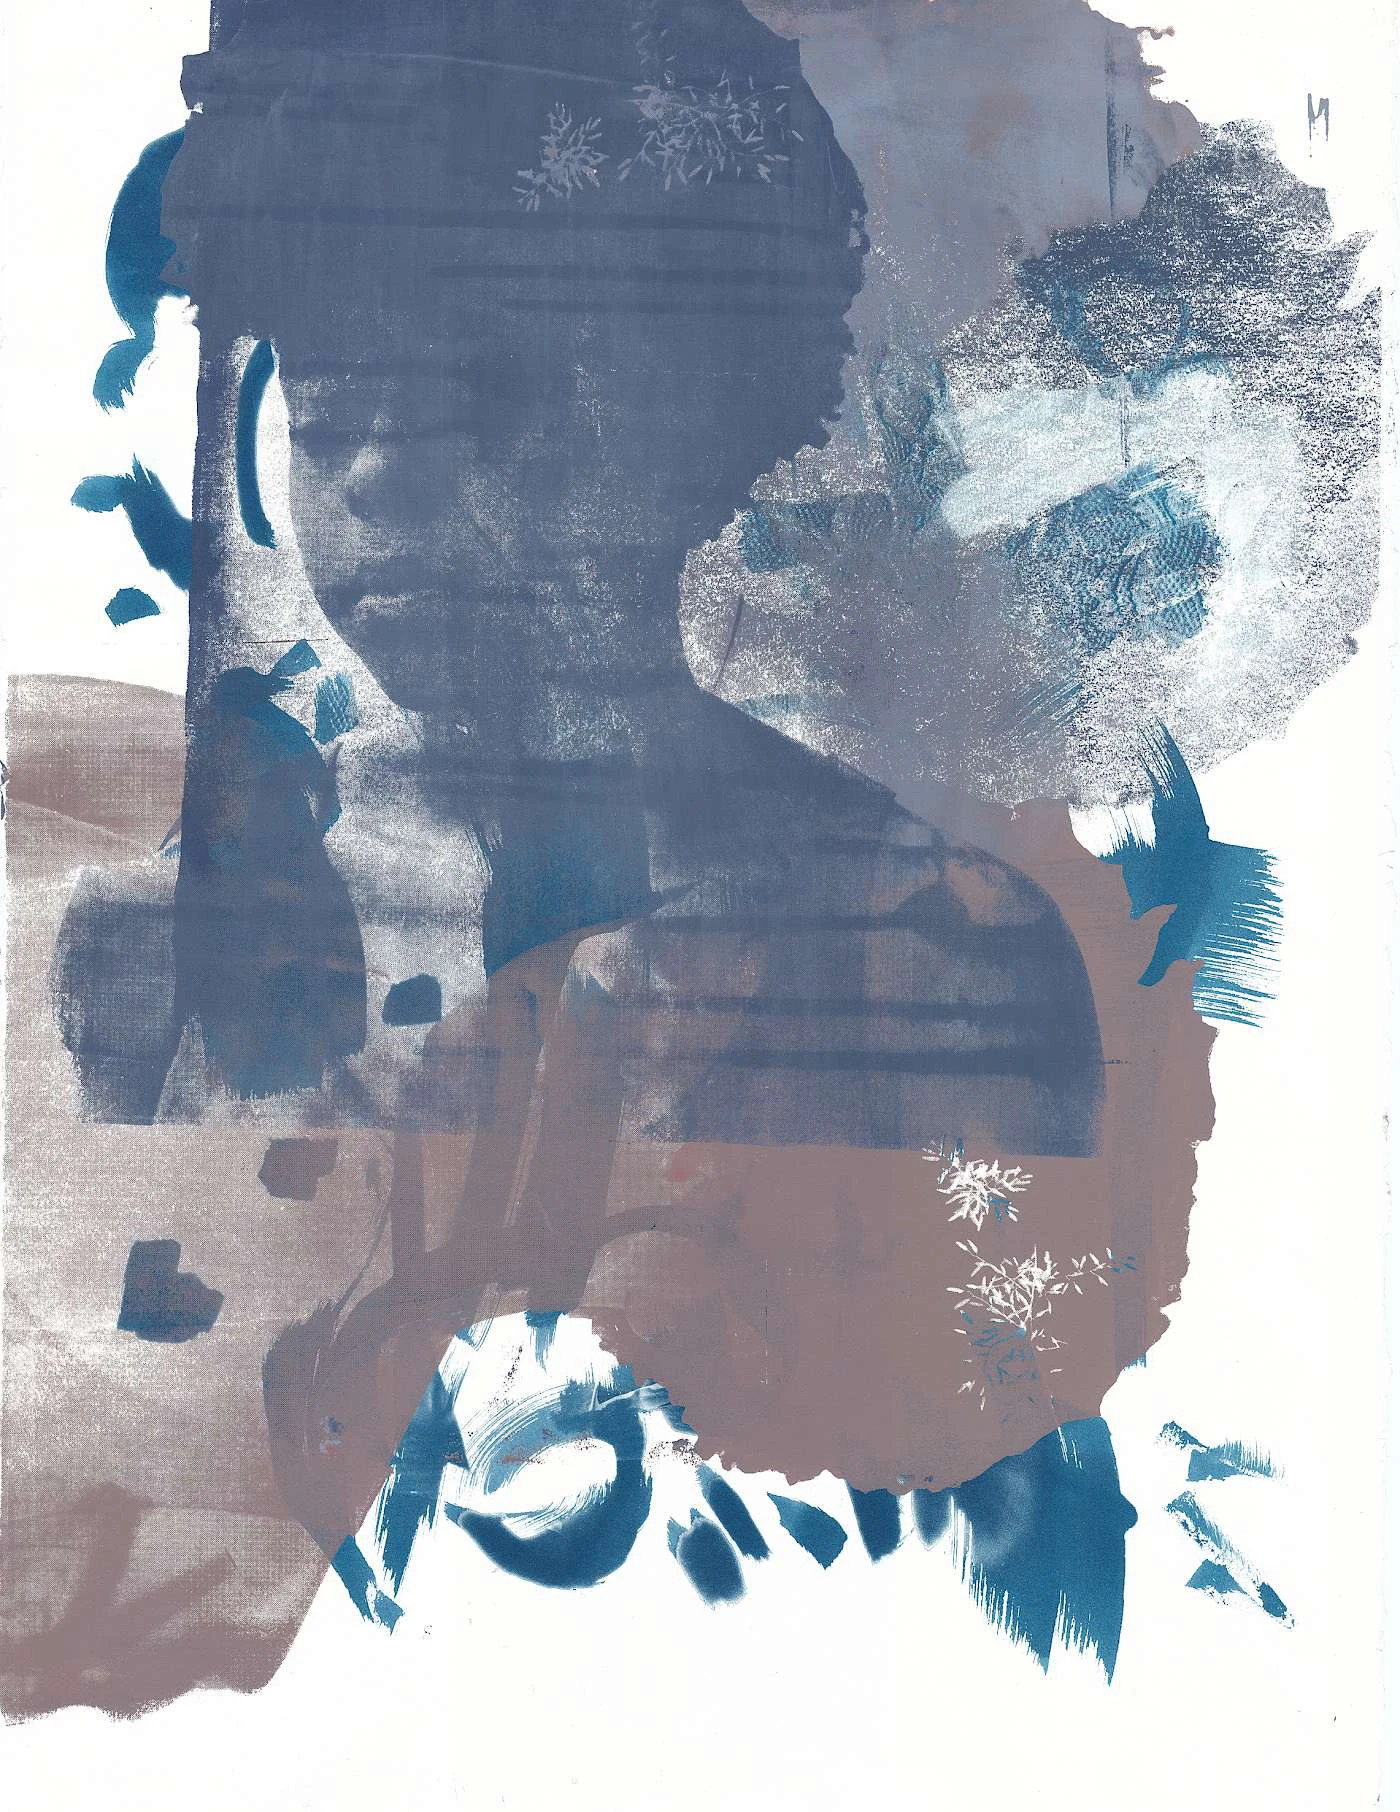 Leah Grant, Notice, 2019, cyanotype and screenprint, 30 x 22 inches